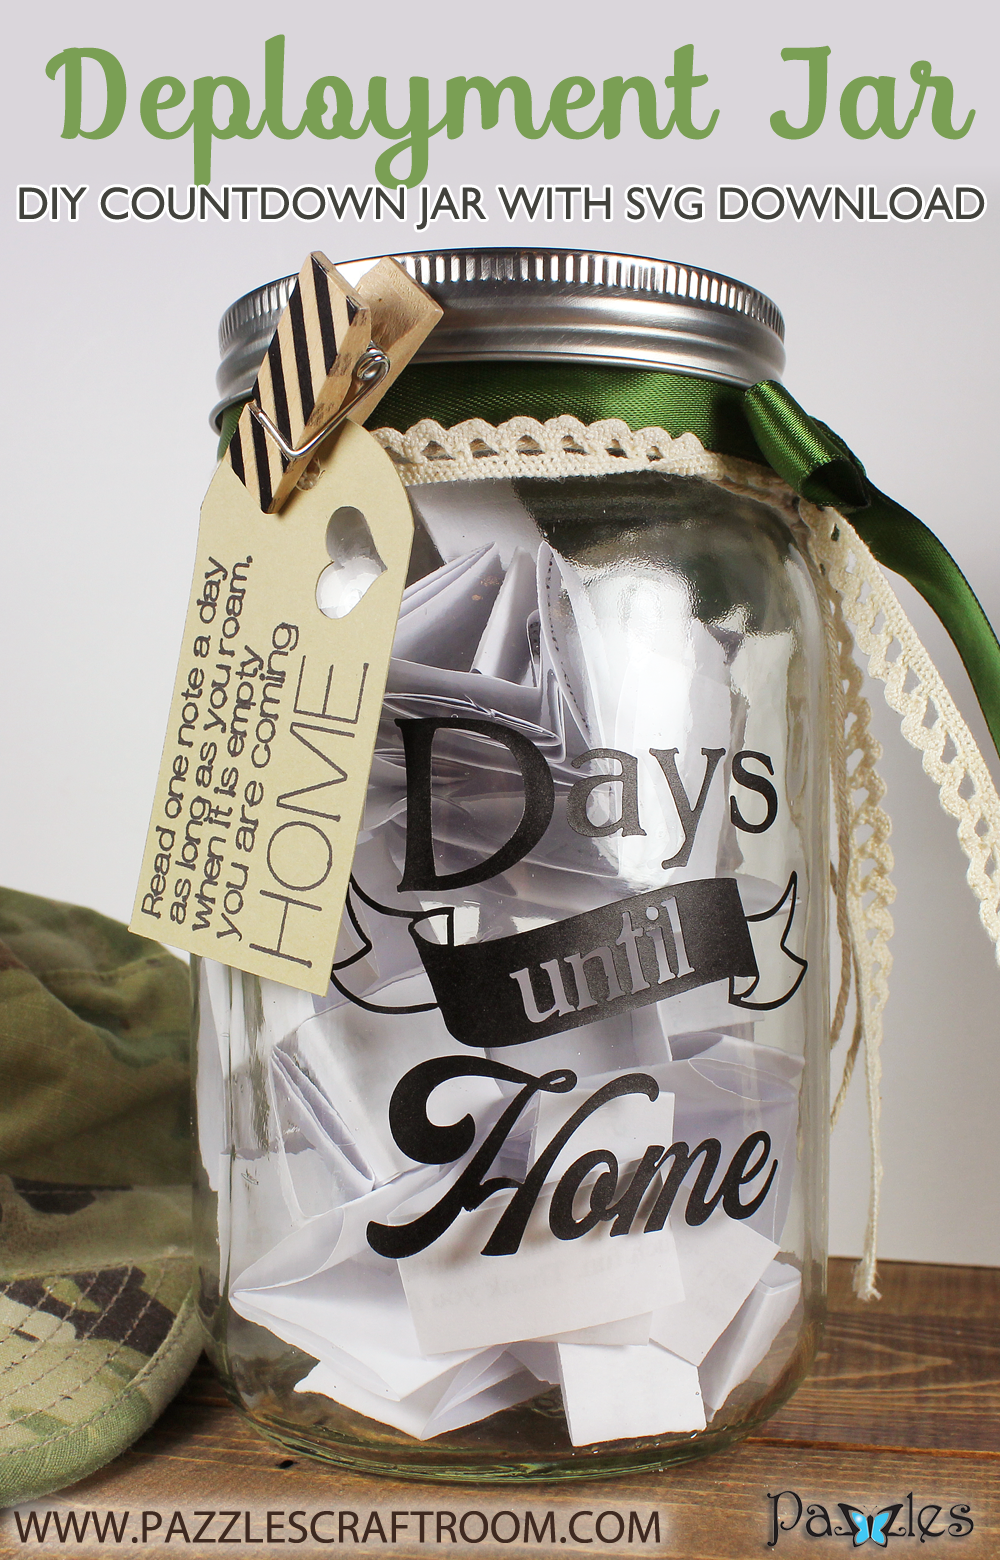 Pazzles DIY Days Until Home Countdown Jar for Deployment with instant SVG download. Compatible with all major electronic cutters including Pazzles Inspiration, Cricut, and Silhouette Cameo. Design by Amanda Vander Woude.